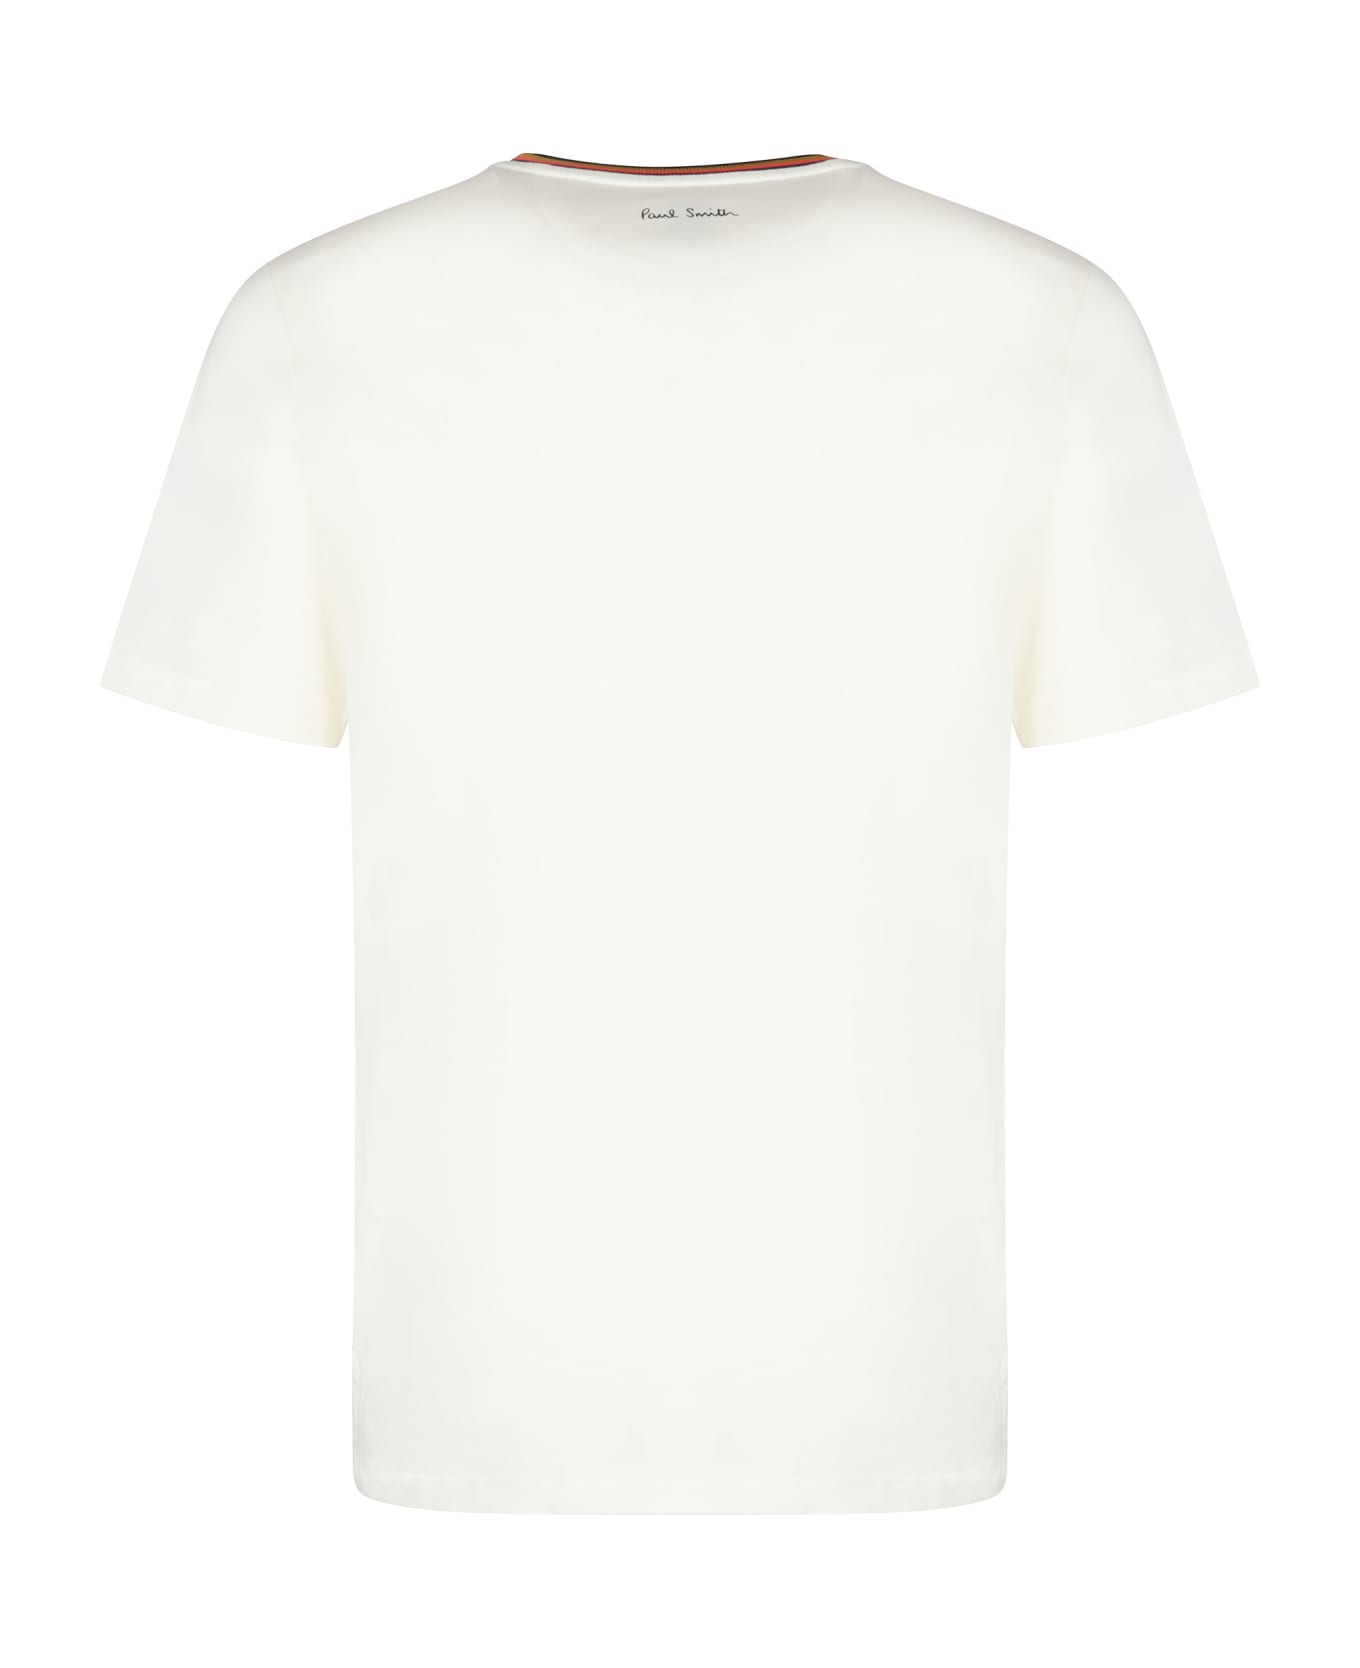 PS by Paul Smith Cotton T-shirt T-Shirt - WHITE